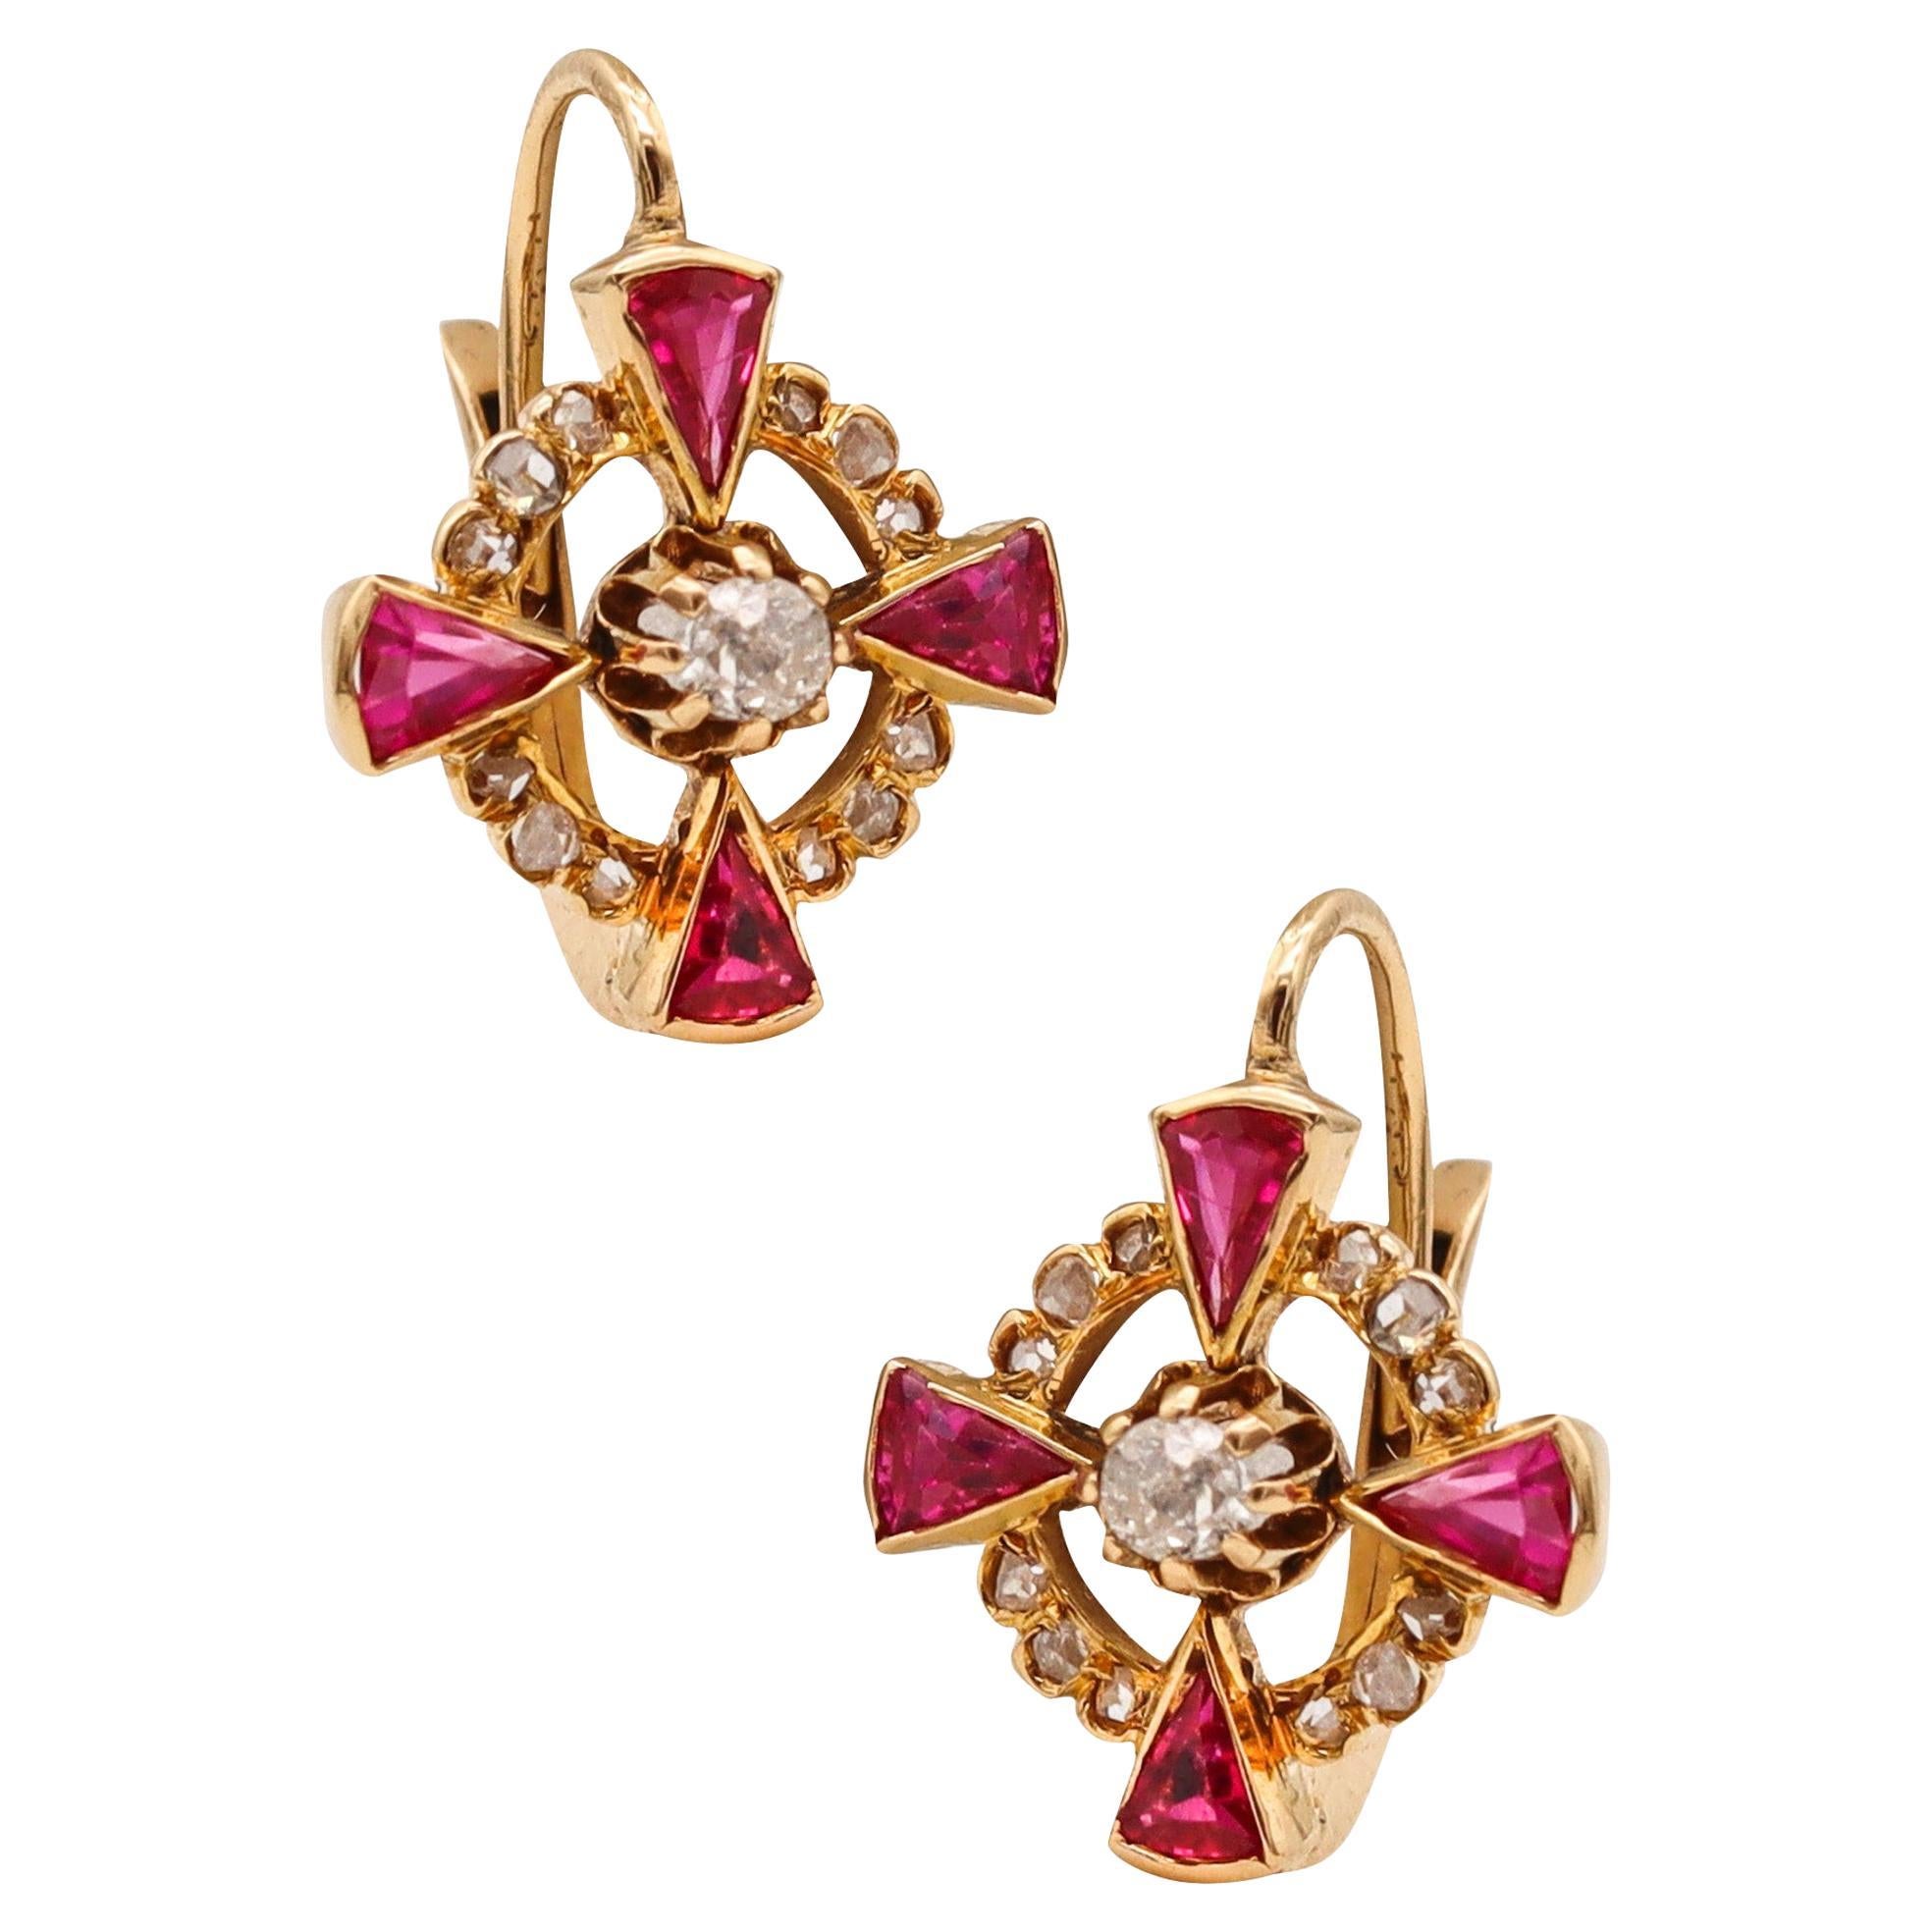 French 1905 Edwardian Earrings in 18kt Gold with Diamonds and Red Burmese Rubies